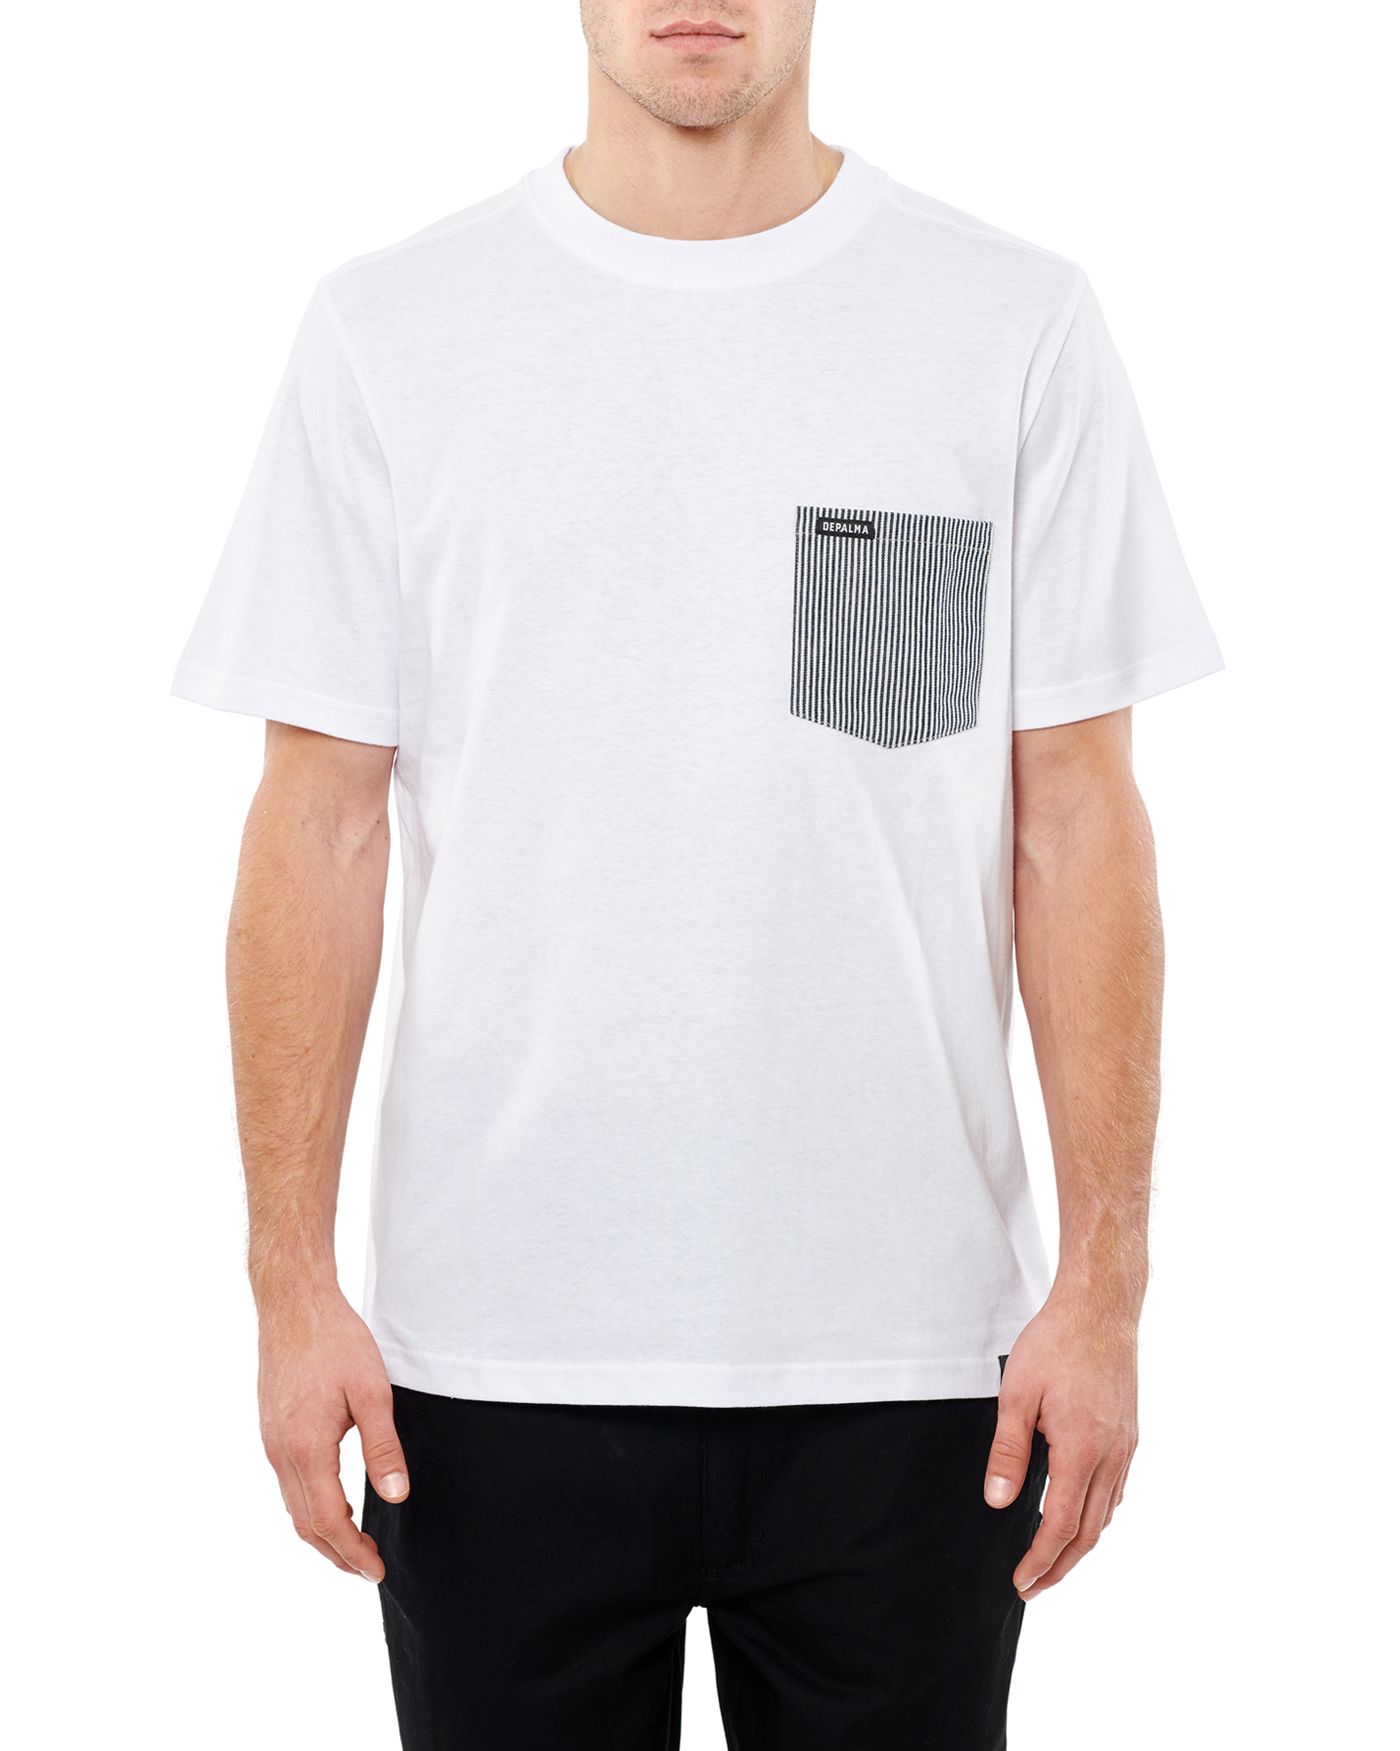 Photo of Hungry Heart S/S Pocket T-shirt, White